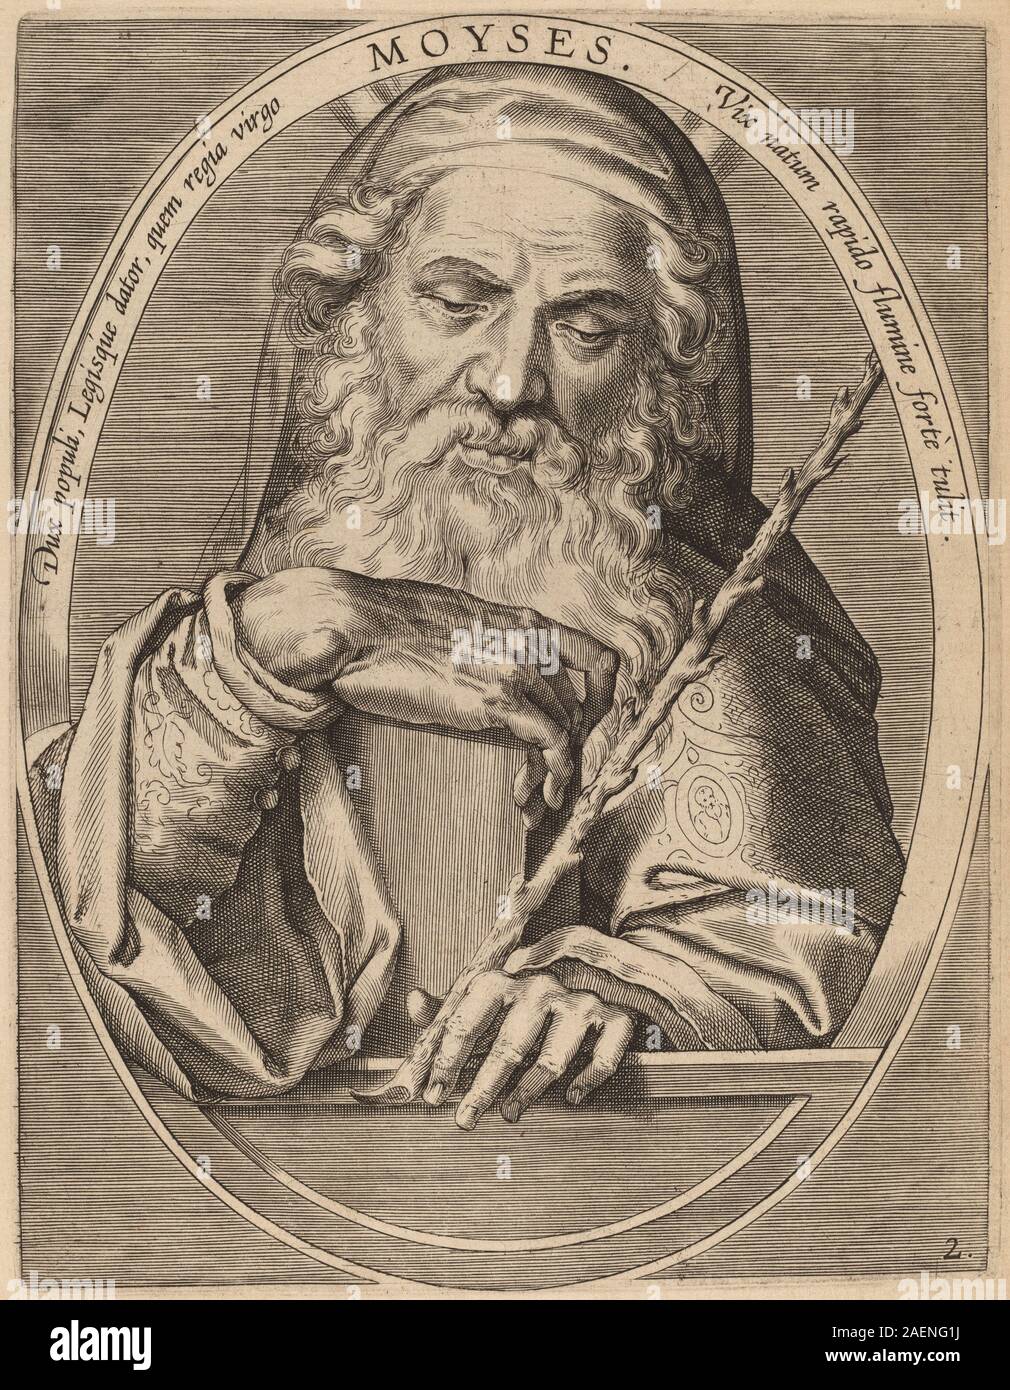 Theodor Galle after Jan van der Straet, Moses, published 1613, Moses; published 1613 Stock Photo